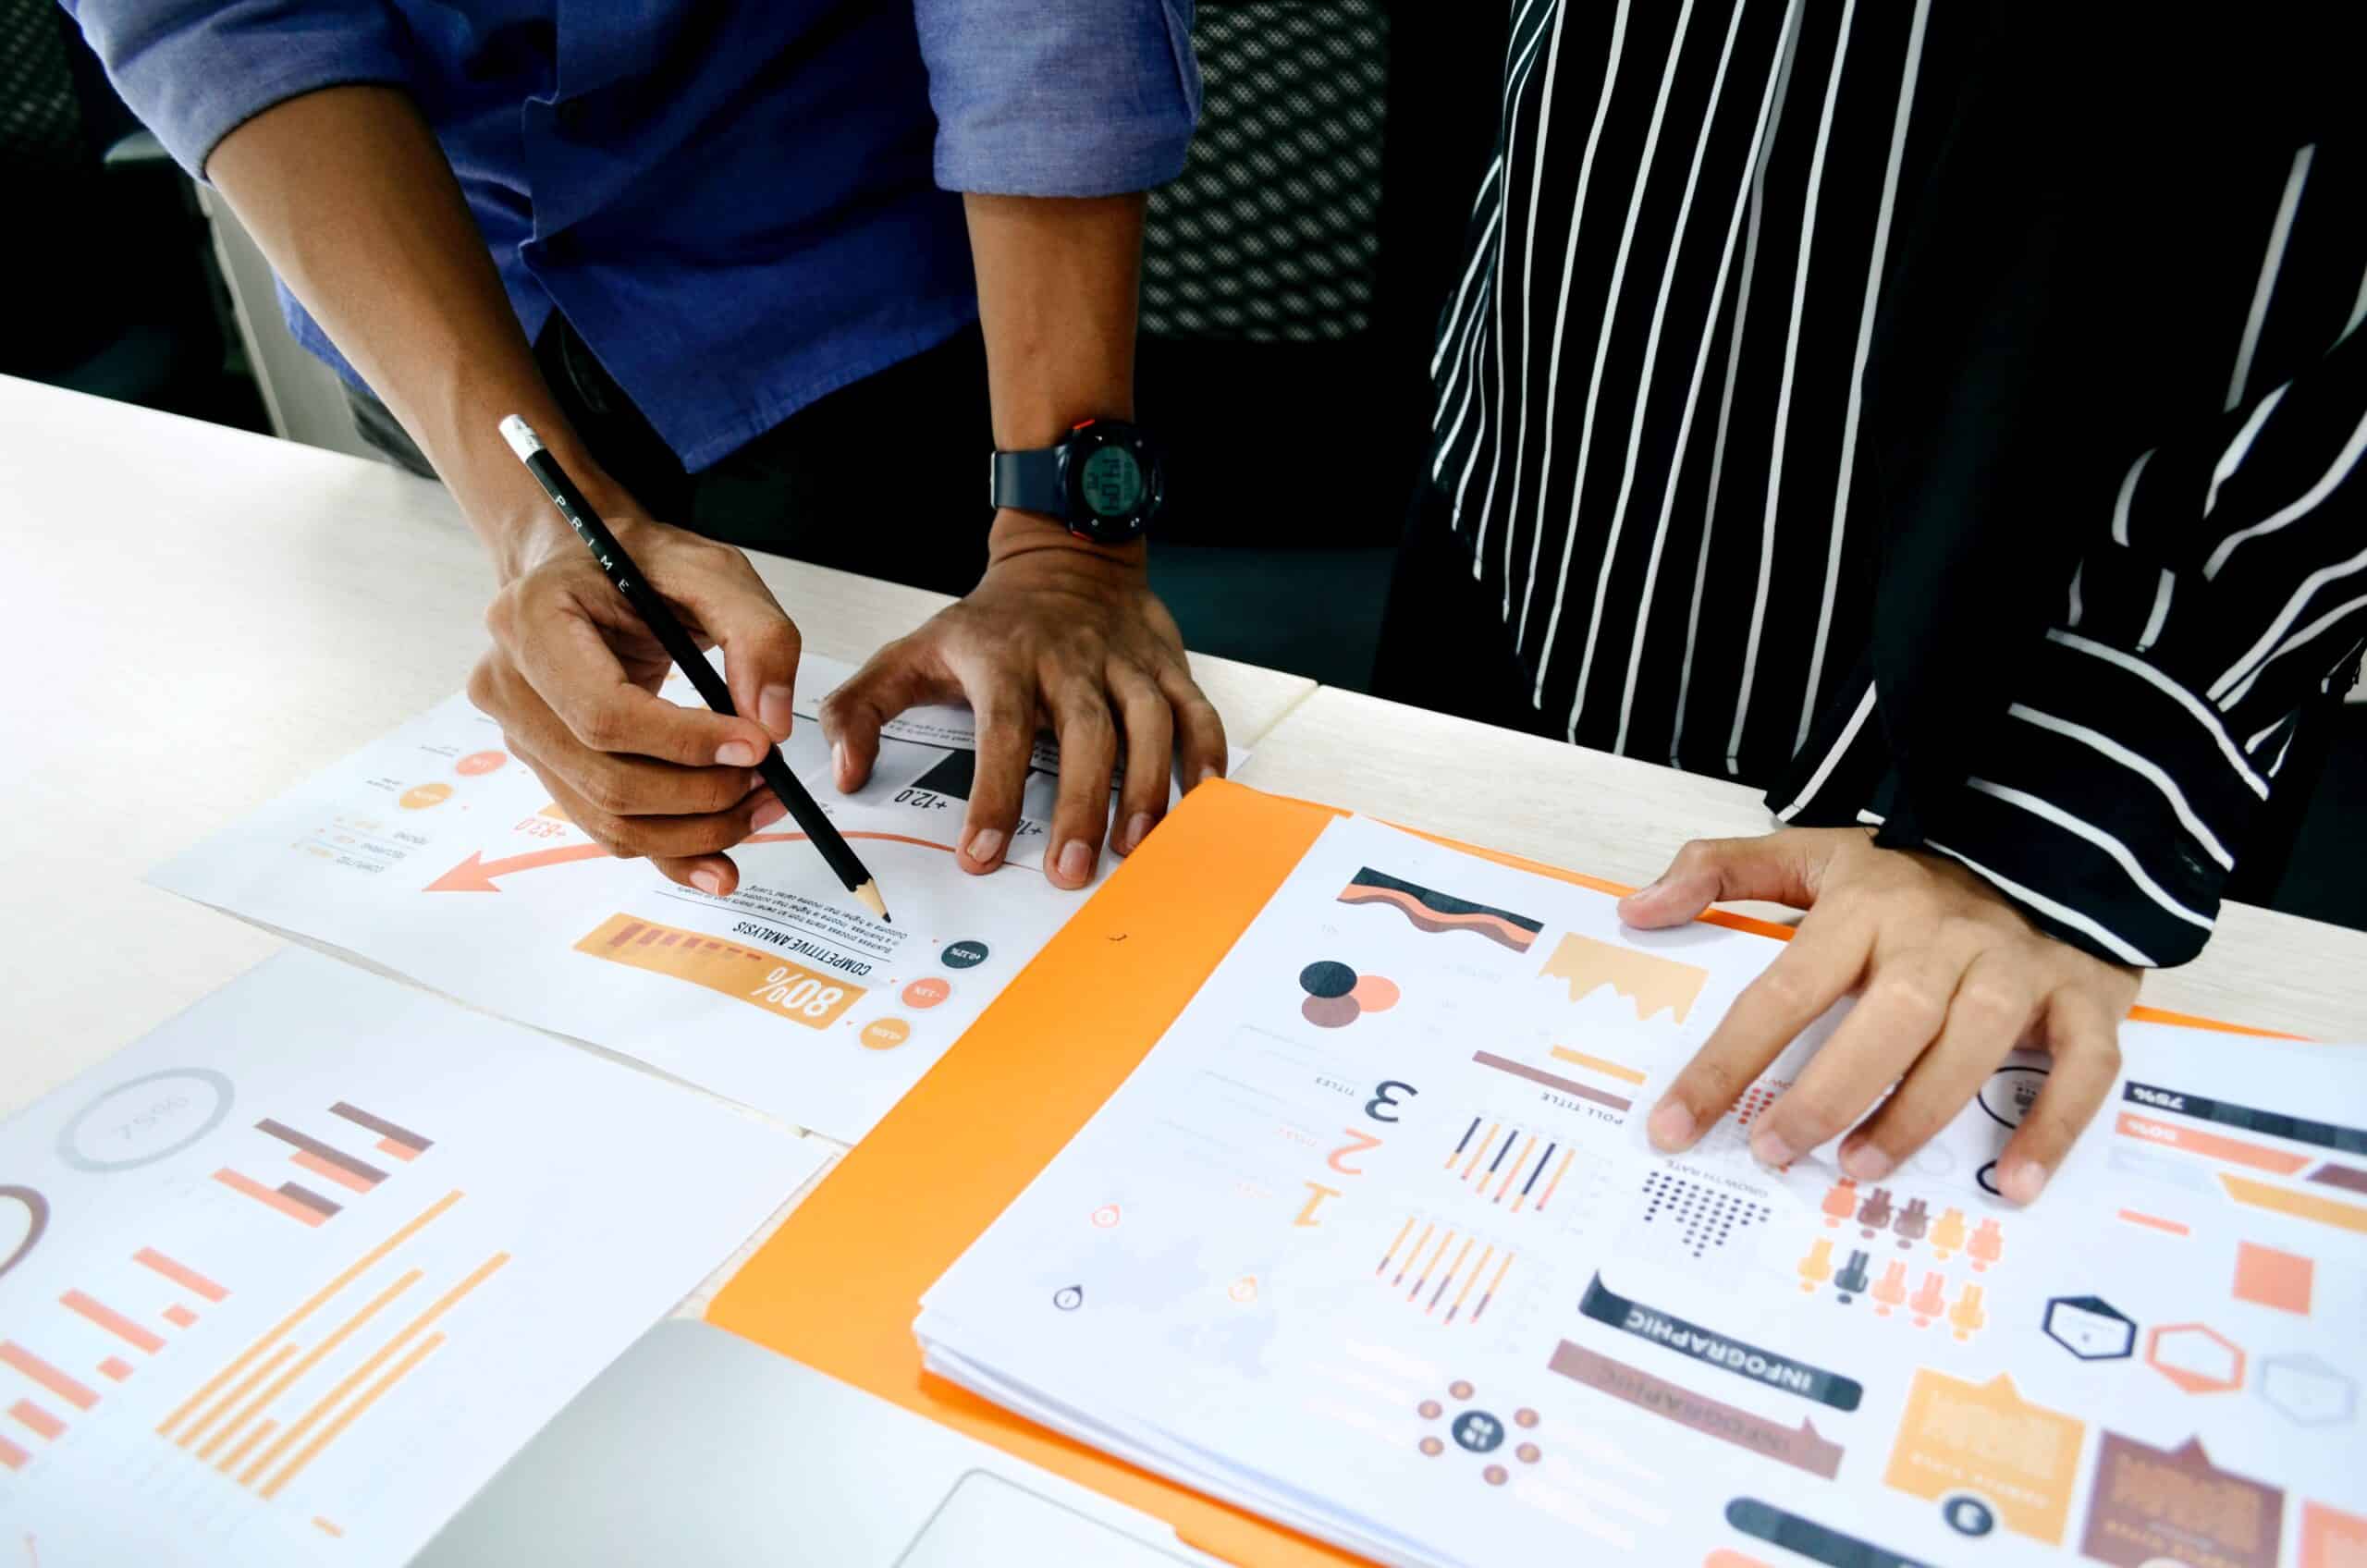 Two people standing in front of a table with several creative designs and marketing analytics dashboards in front of them.  They are collaborating to find the ideal solution for a client challenge.